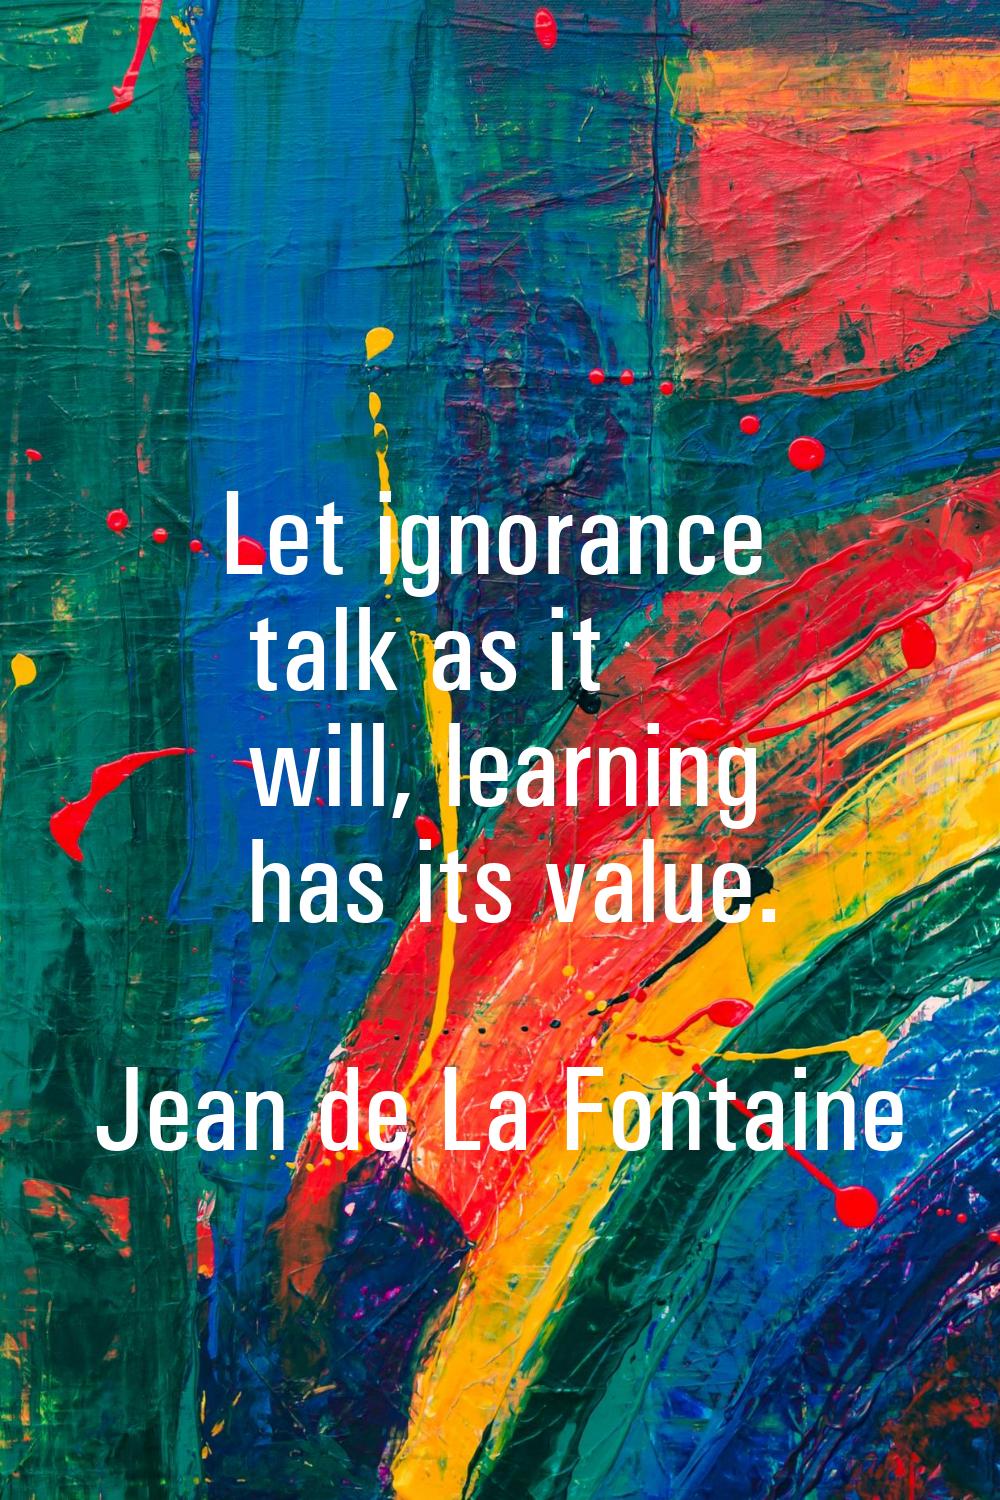 Let ignorance talk as it will, learning has its value.